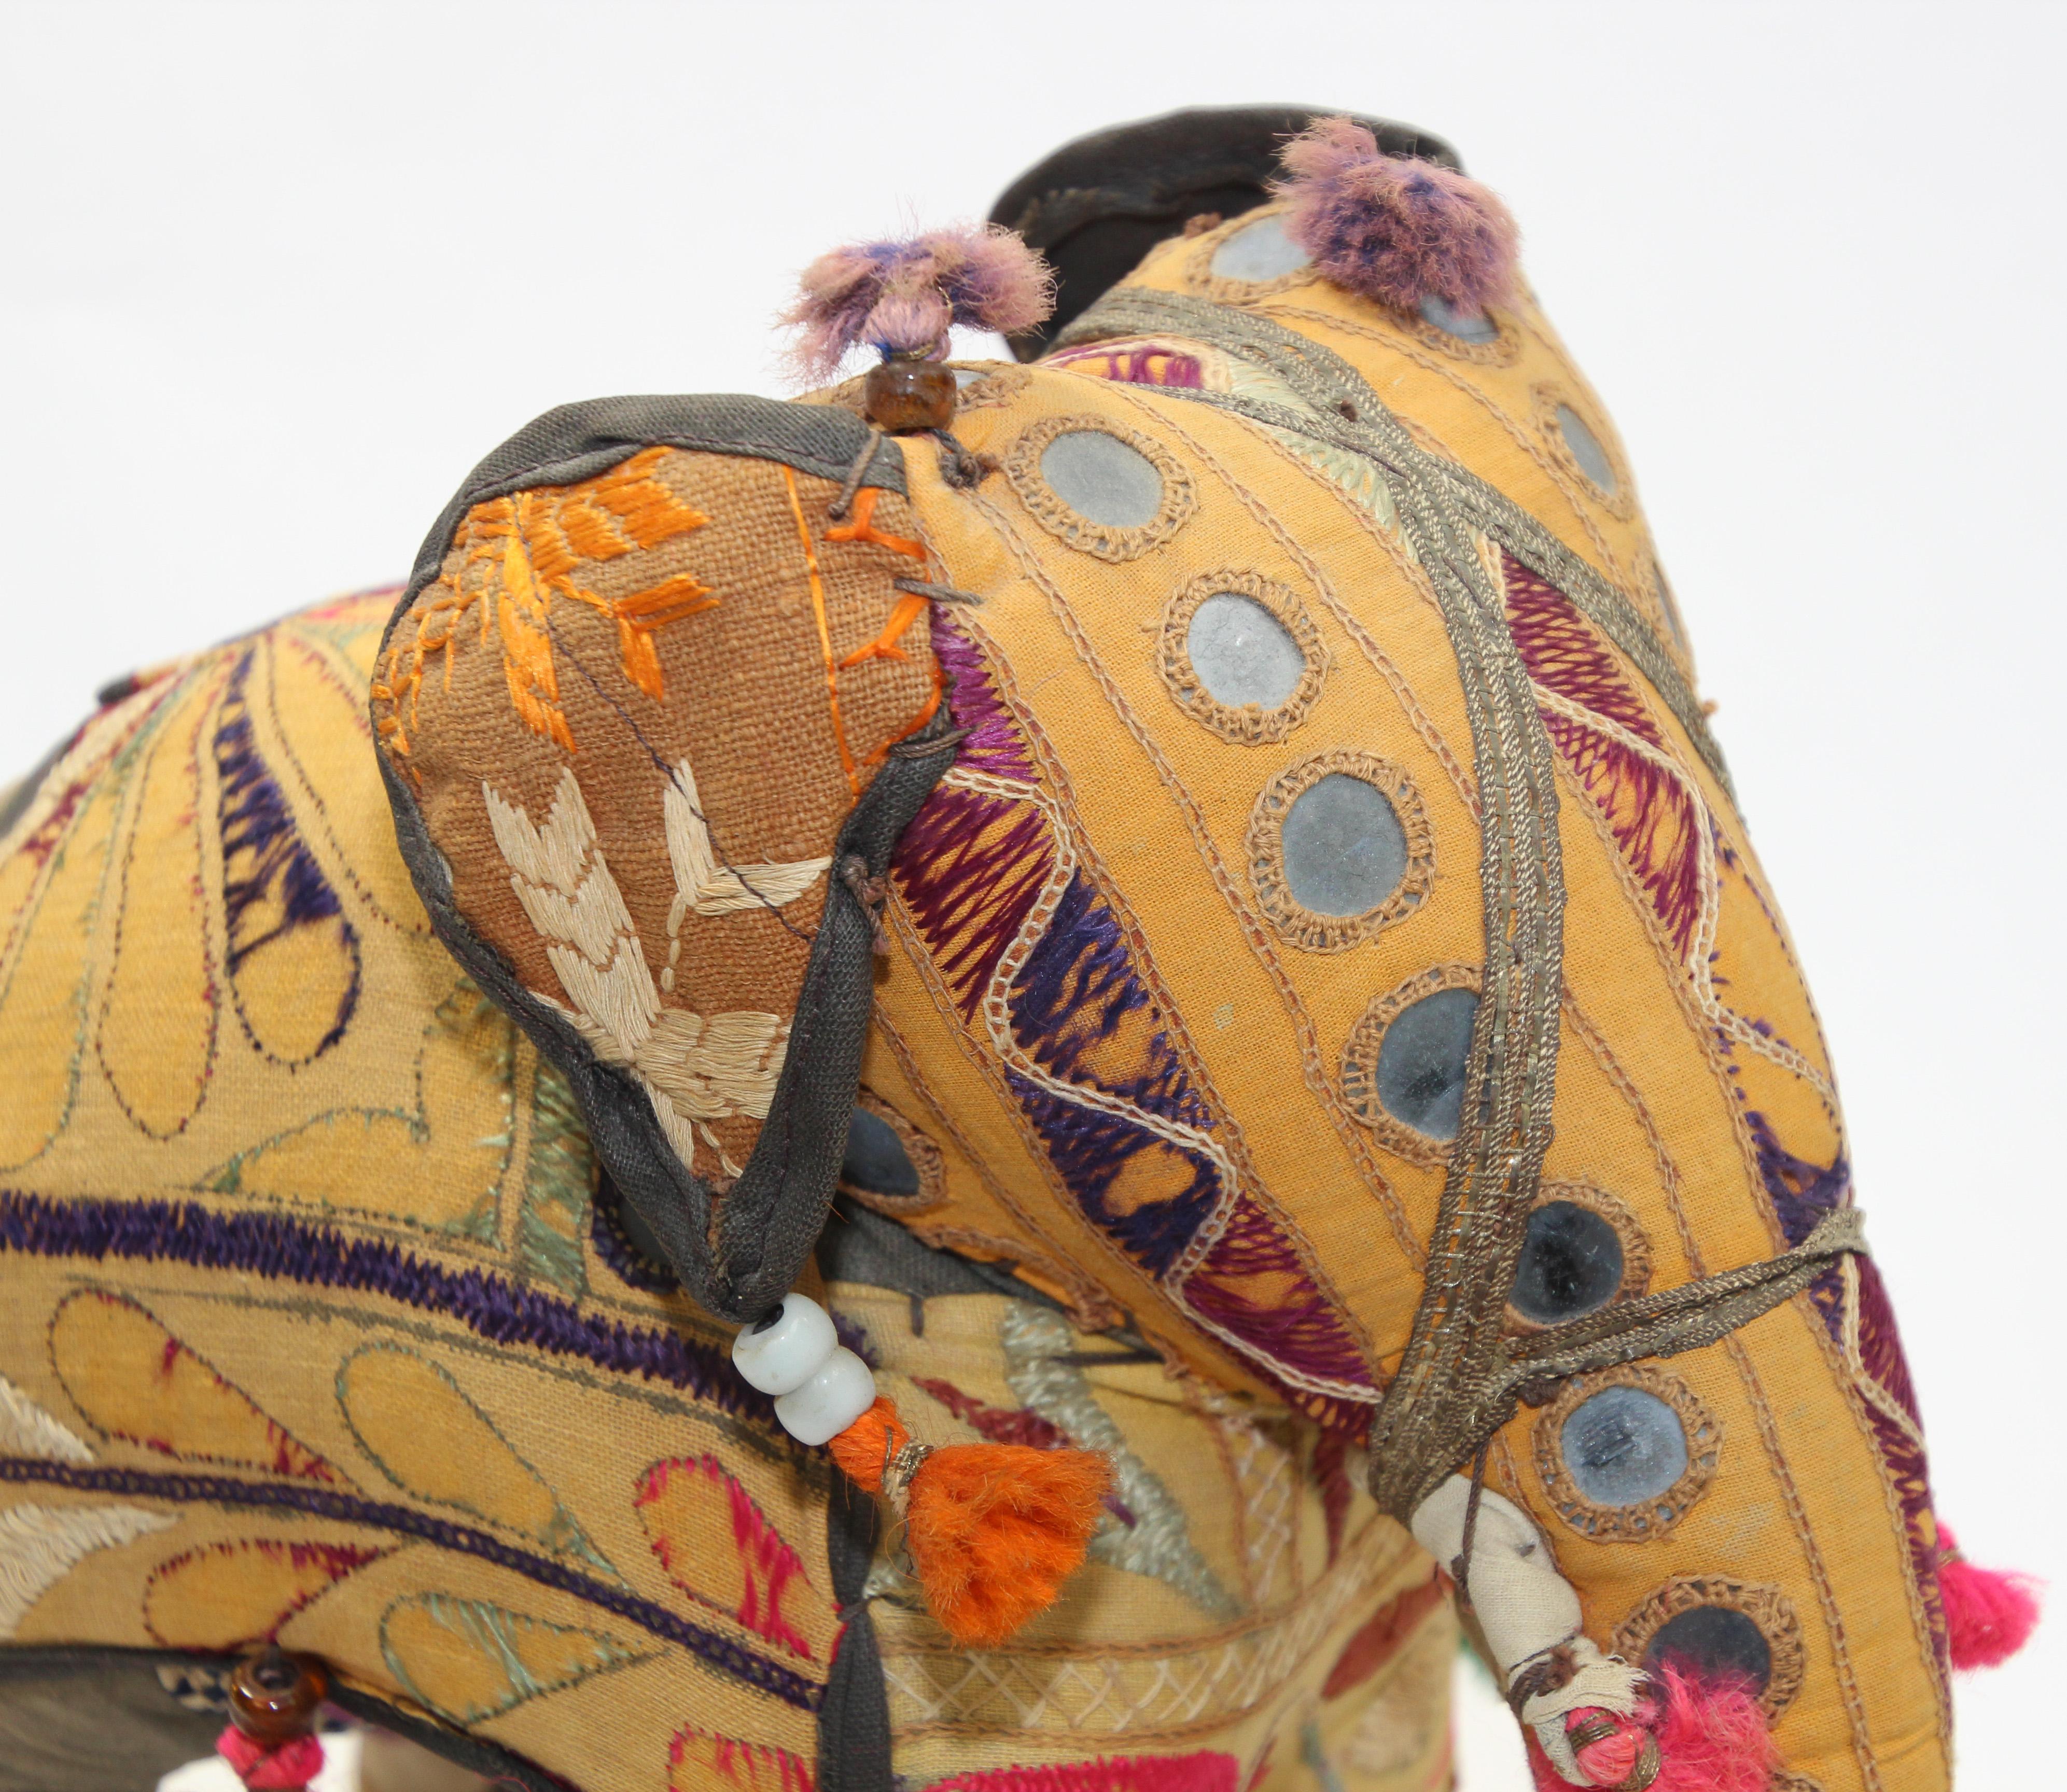 Anglo Raj Vintage Hand-Crafted Stuffed Cotton Embroidered Elephant, India, 1950 For Sale 6